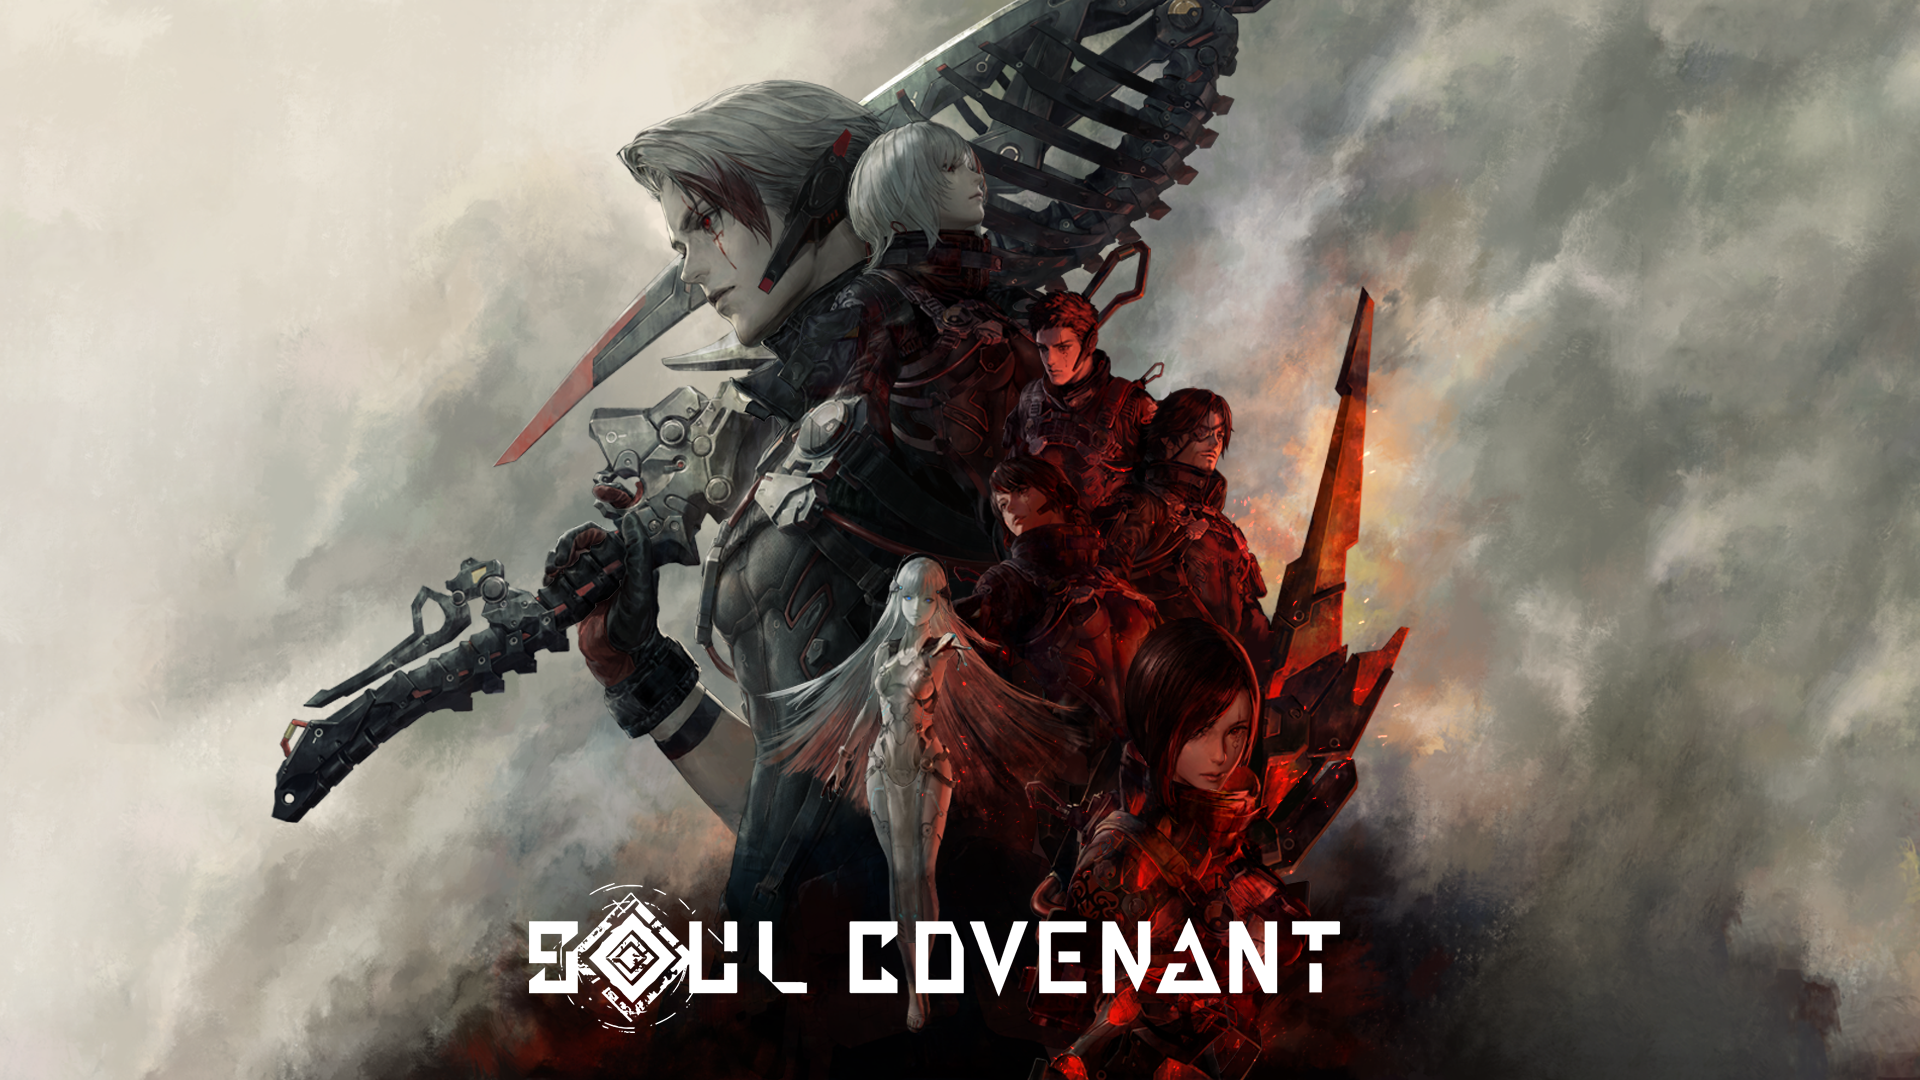 Soul Covenant Hands-On: VR Action At The End Of Humanity